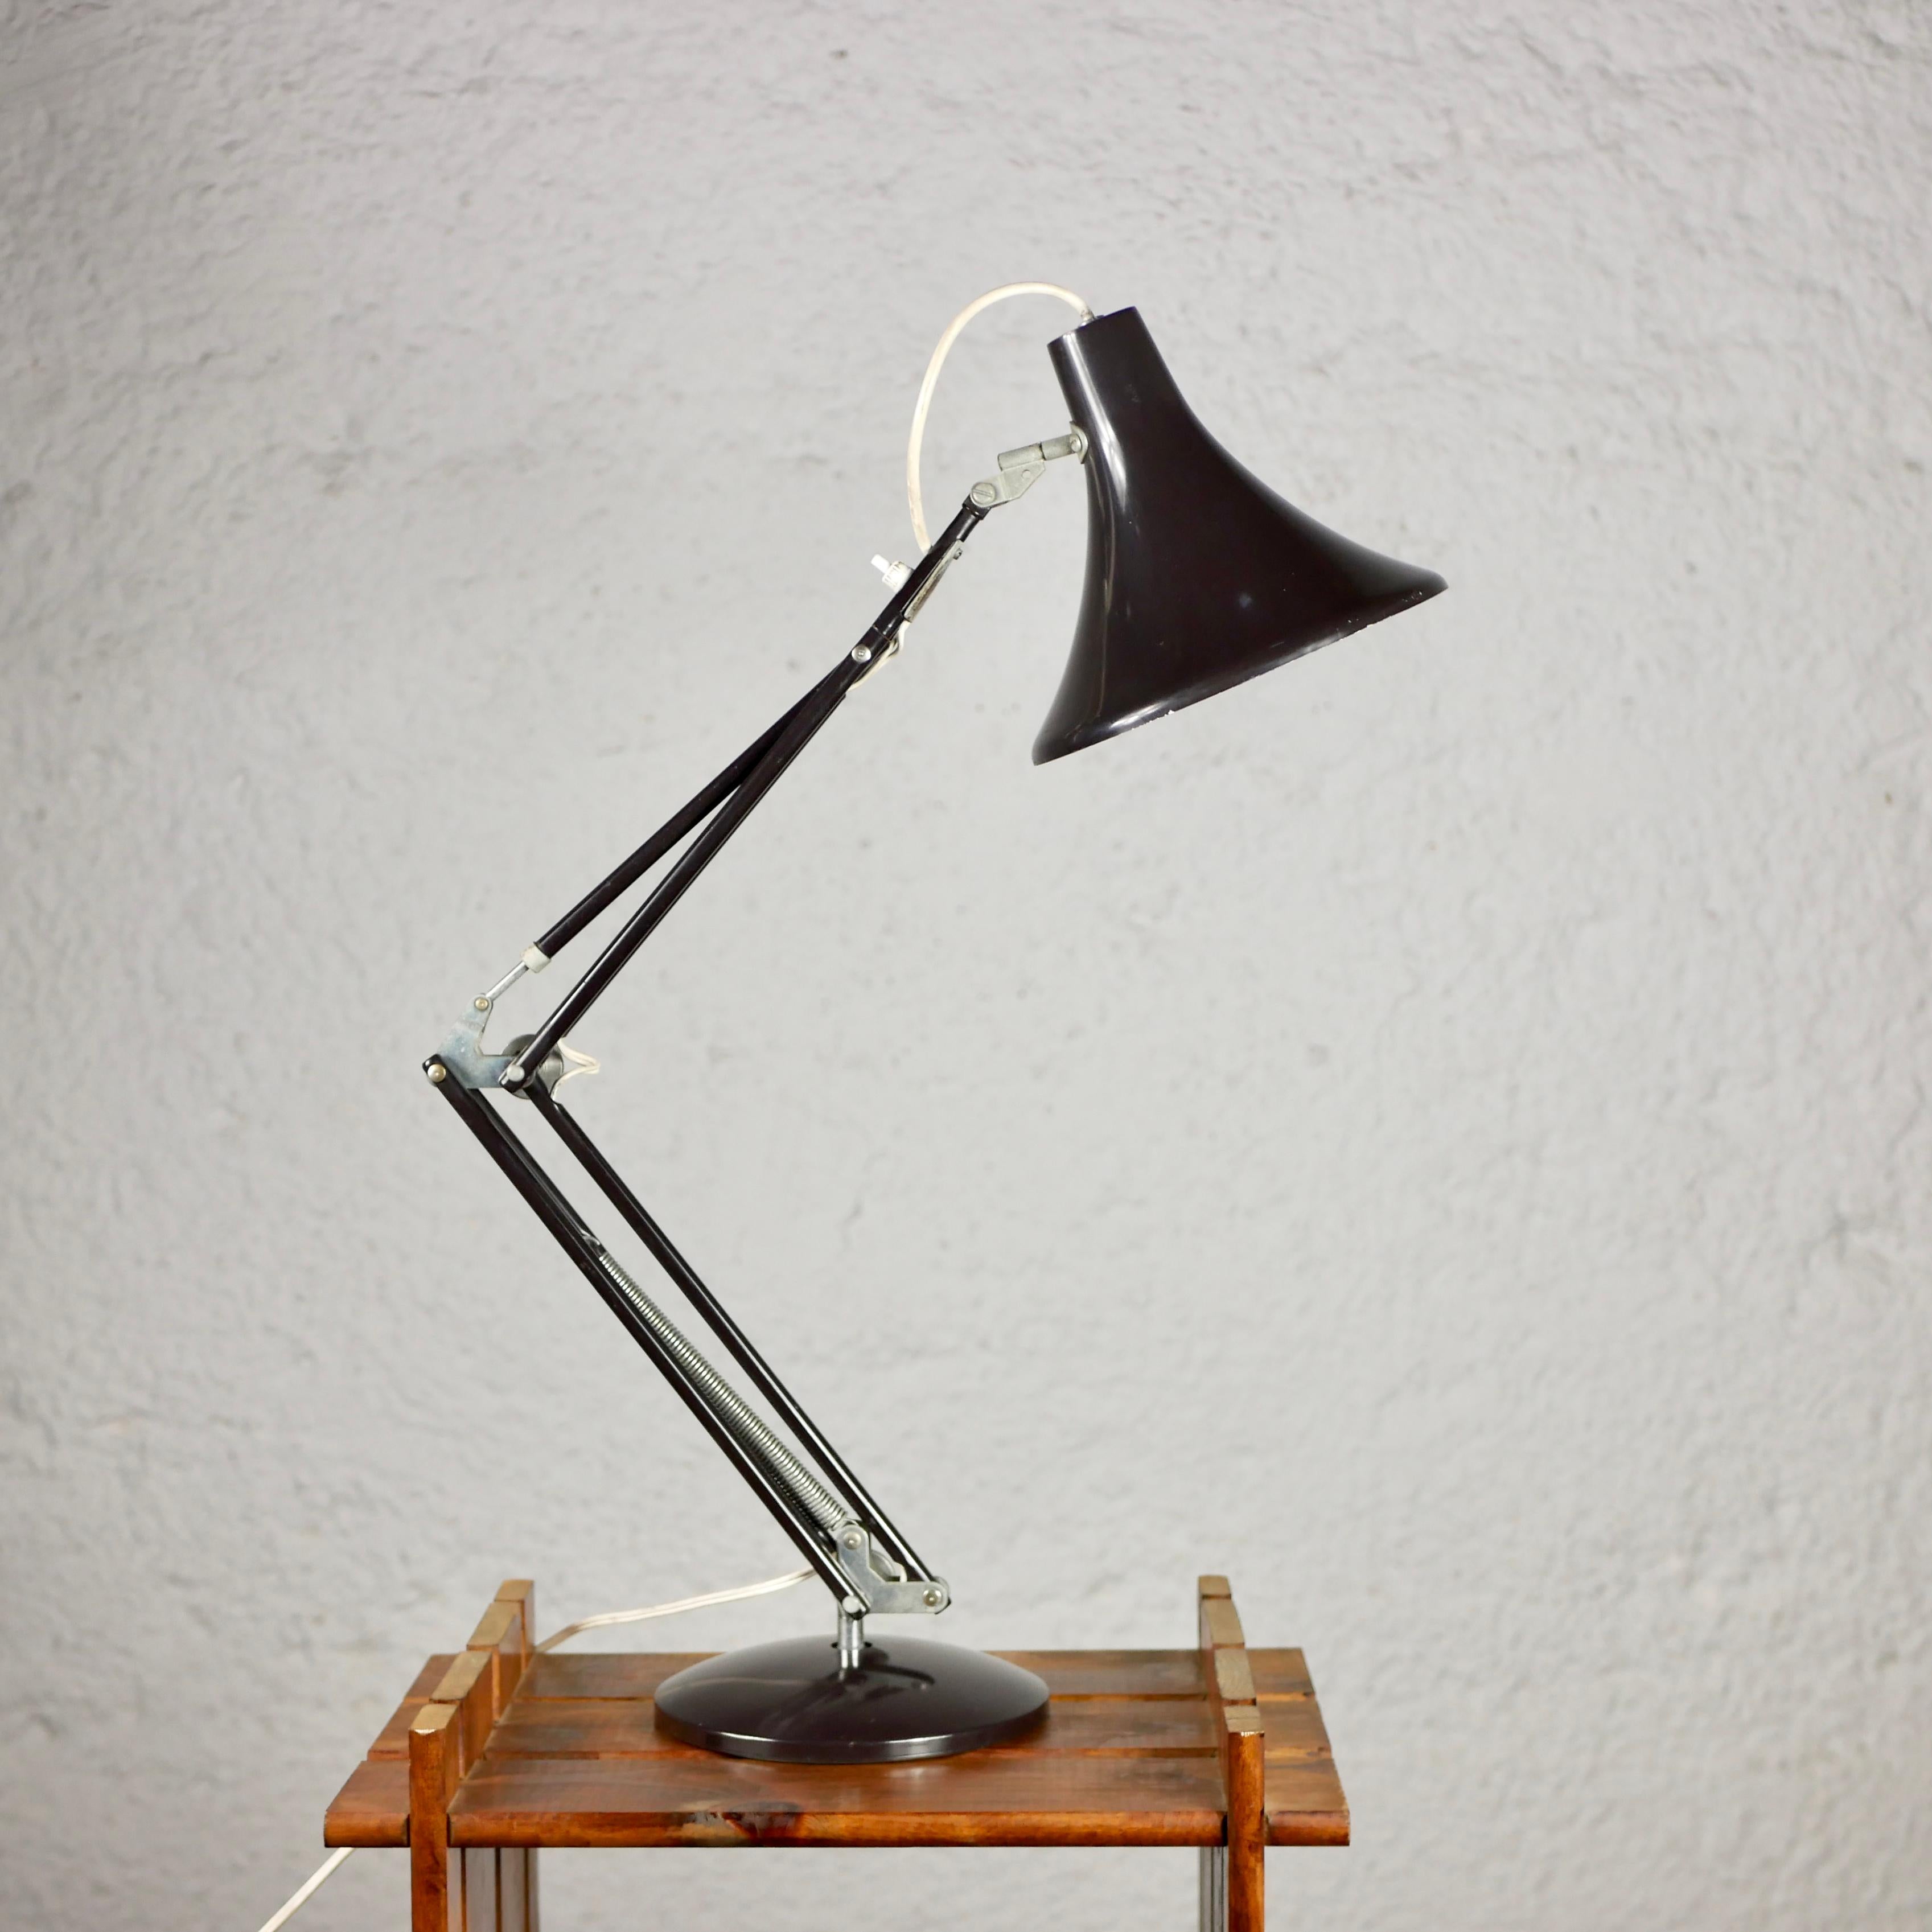 Nice classical architect lamp, really close to the Luxo lamp in dark brown lacquered metal. Sturdy, articulated and practical. 
Overall good condition.
Dimensions: 2 arms of 33cm and 37cm, around 60cm height.